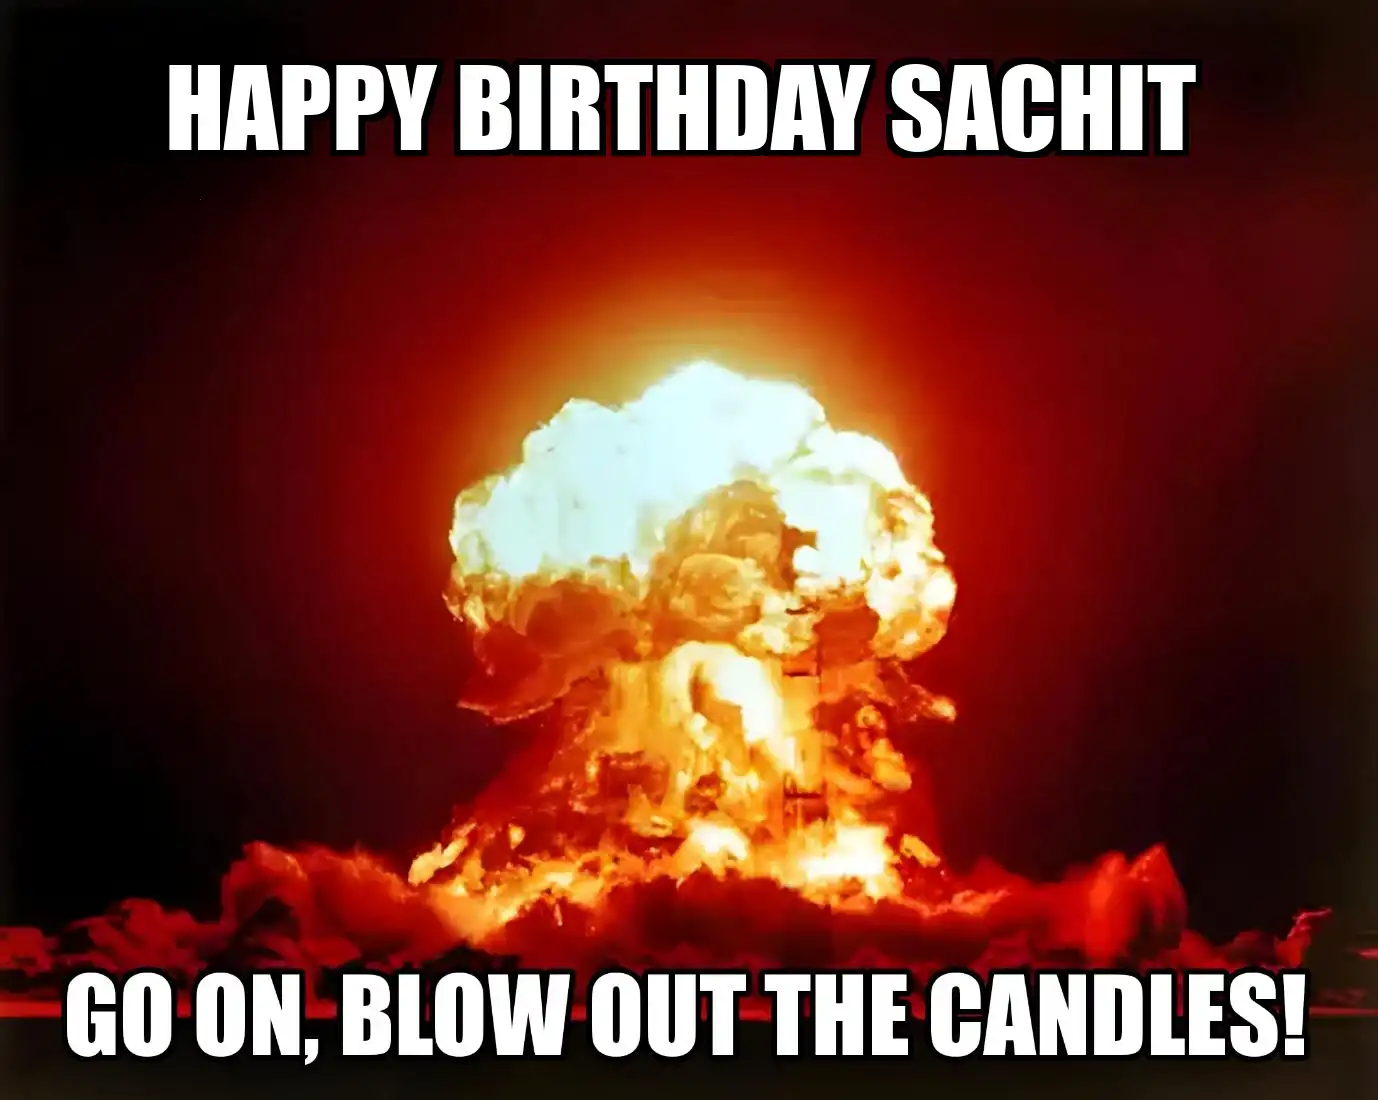 Happy Birthday Sachit Go On Blow Out The Candles Meme